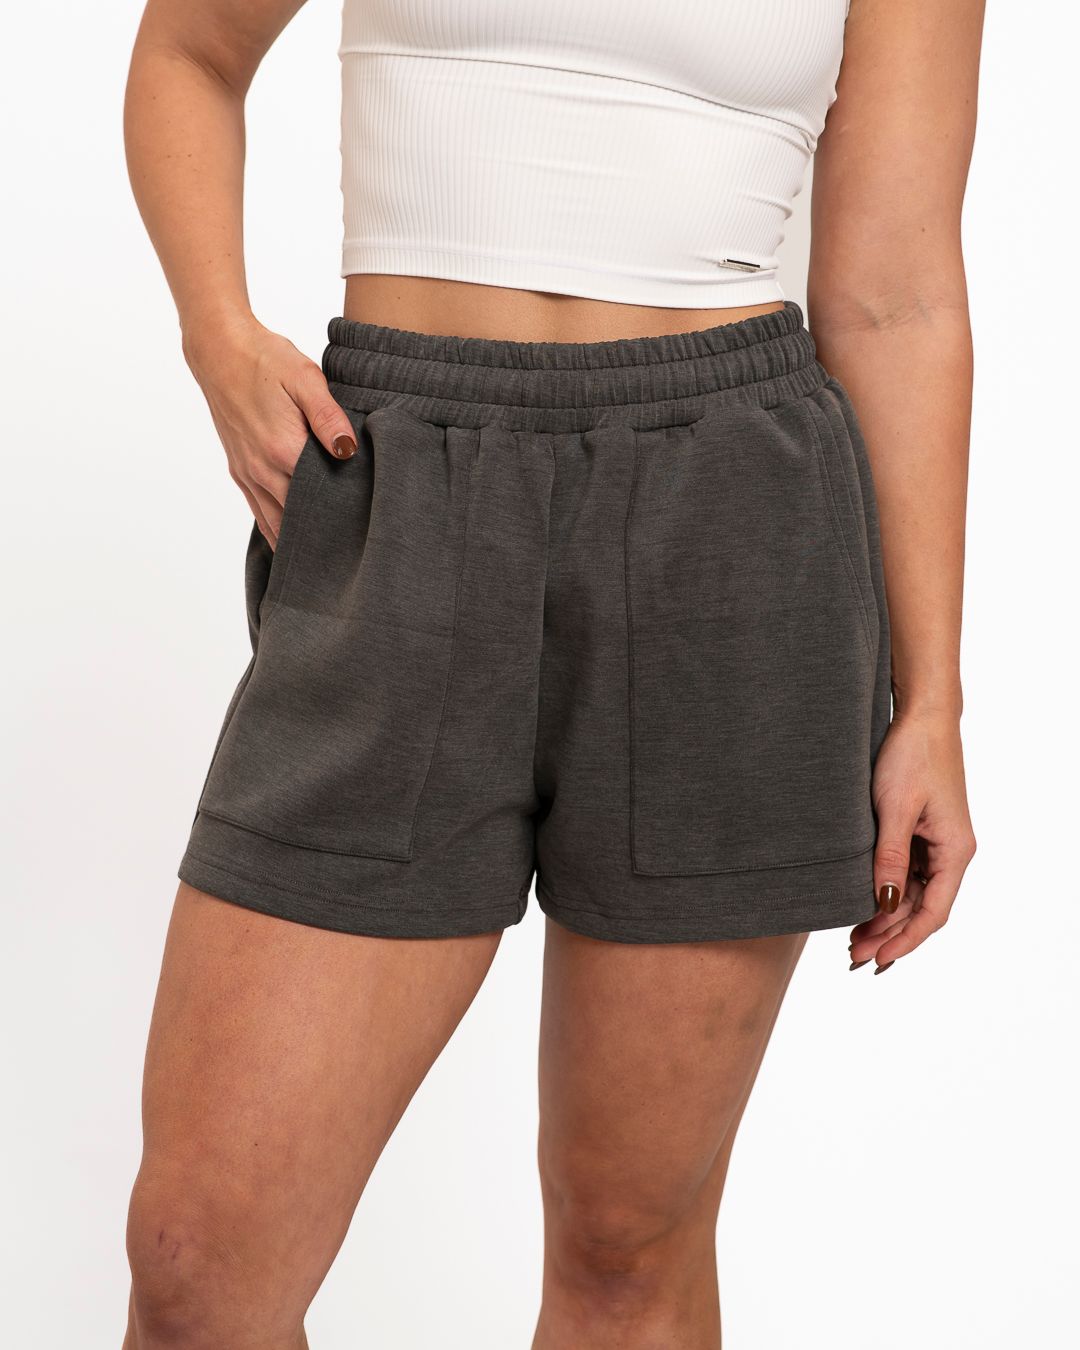 WOMEN'S On-The-Go Short (SoftMotion Fabric) - The Sydney Adams Collection